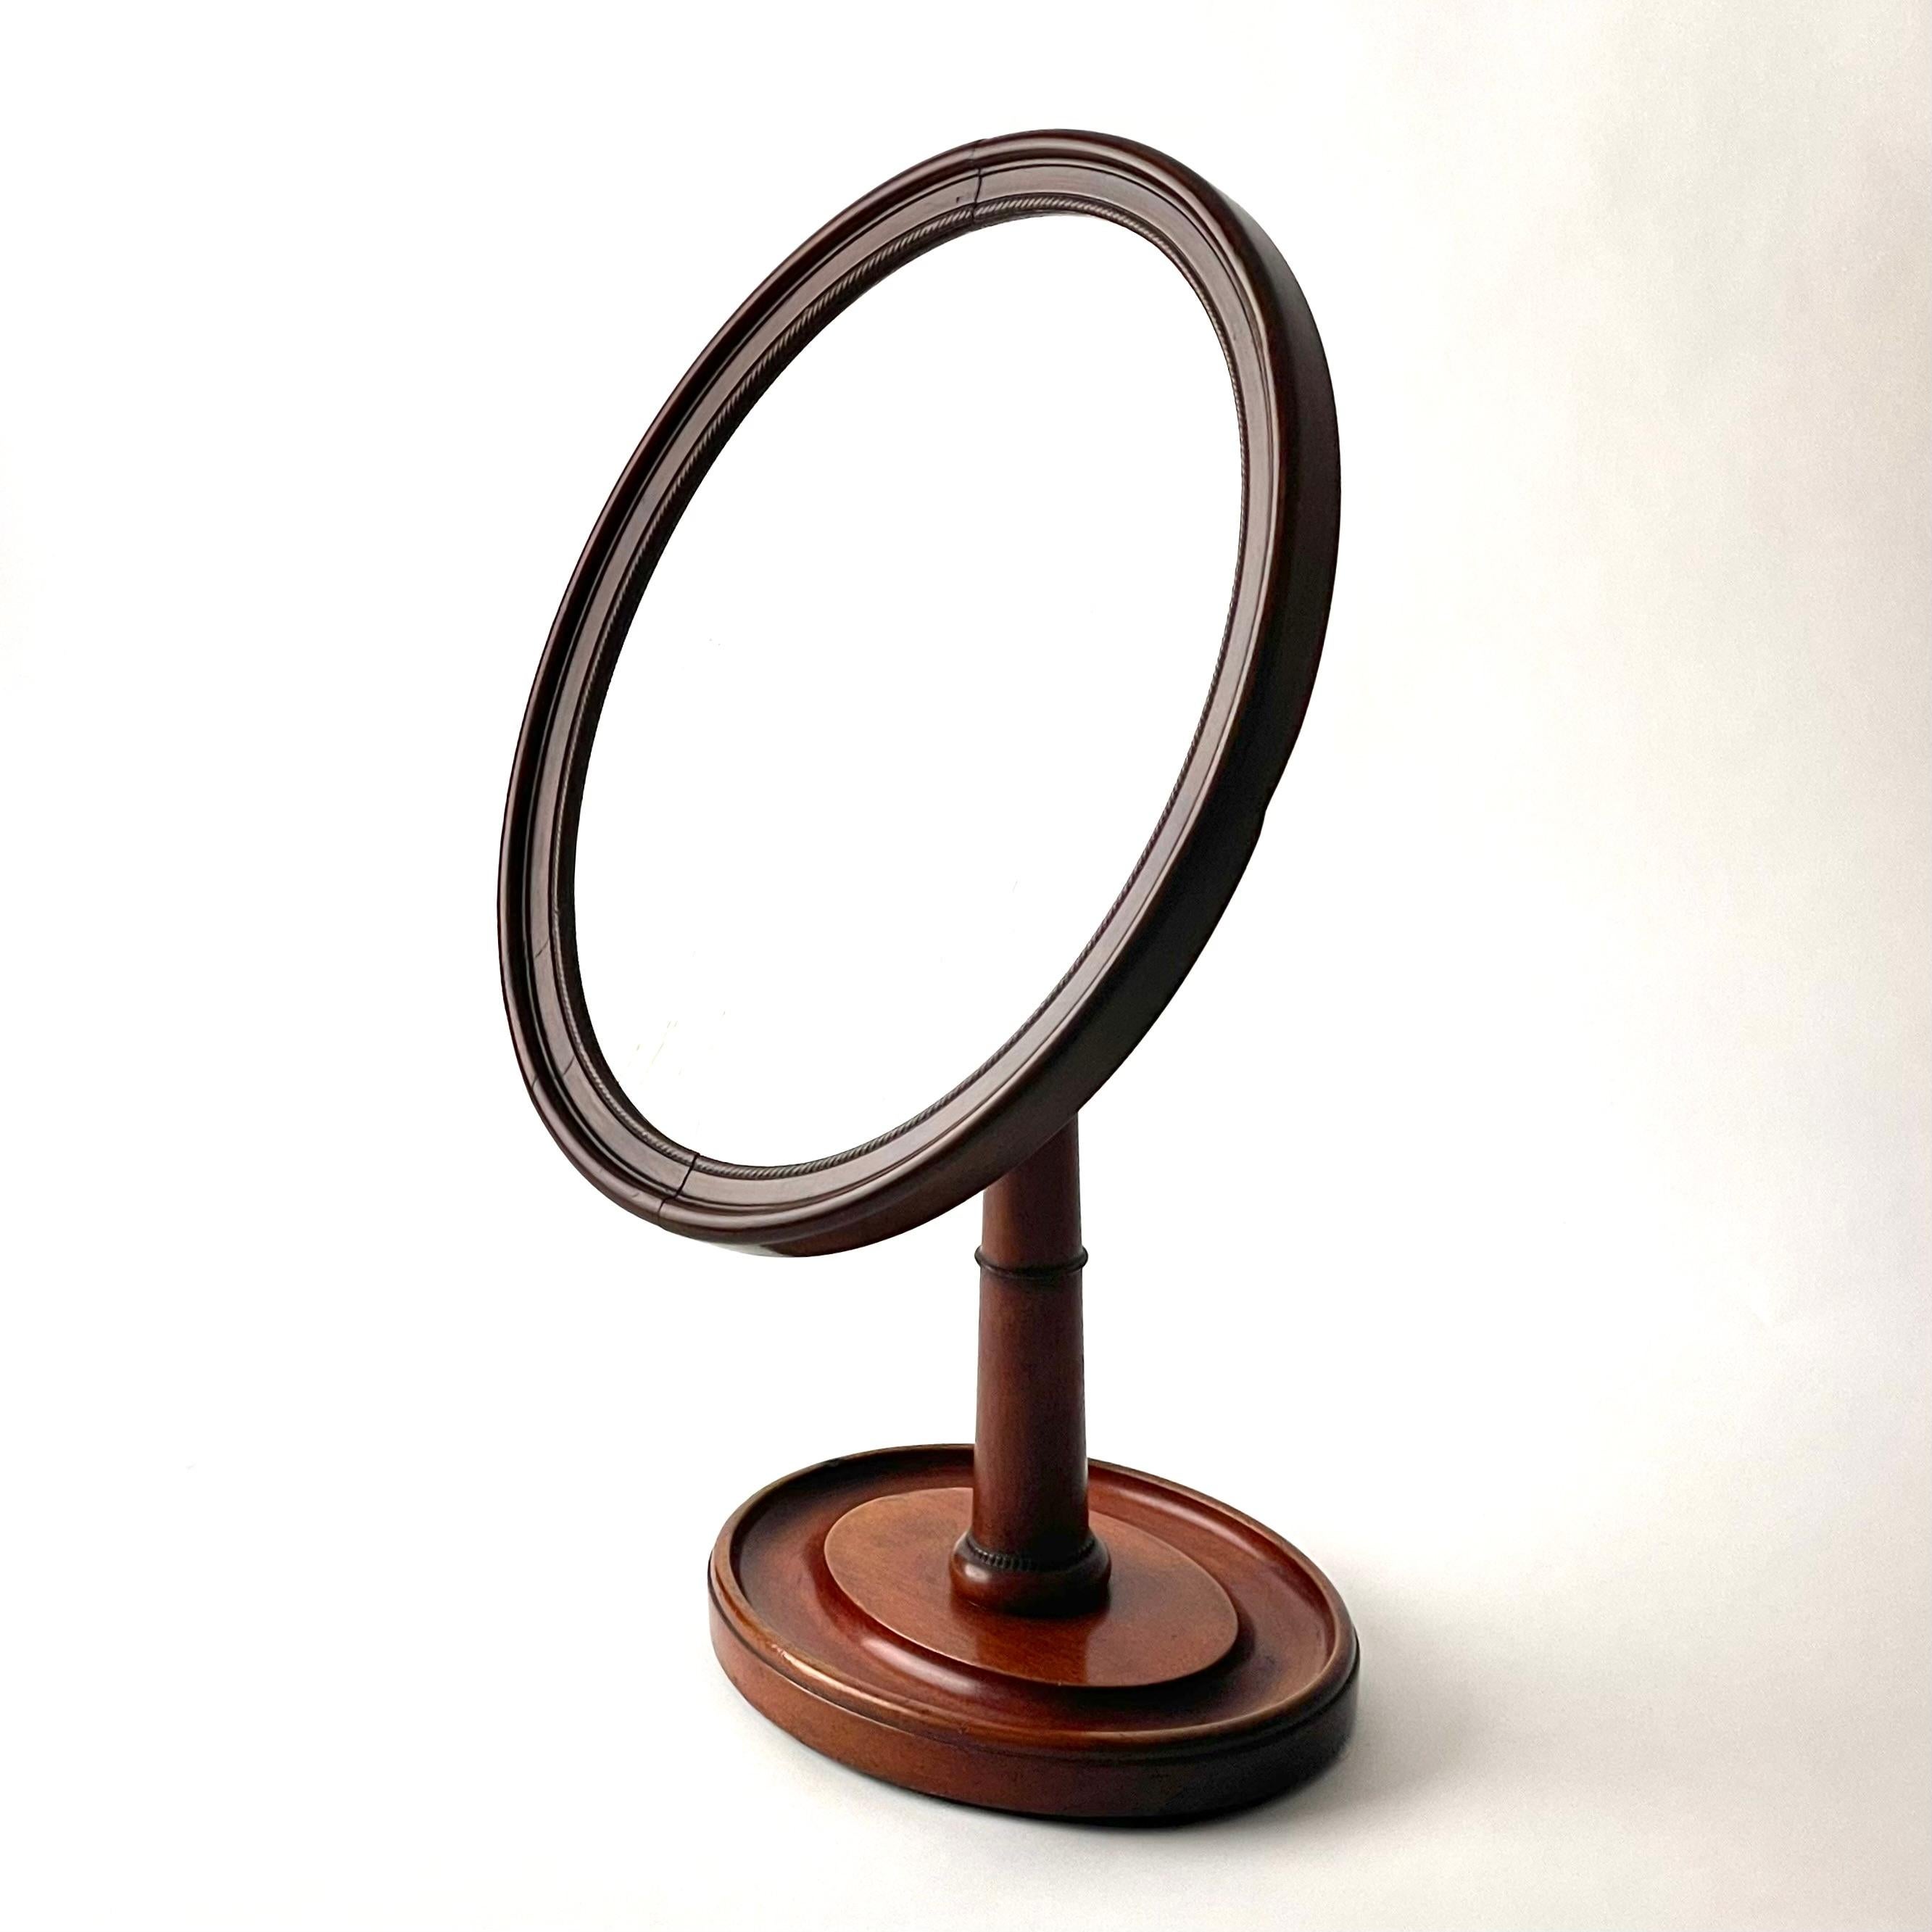 Elegant adjustable Table Mirror from the late 19th Century. Made in solid mahogany (swietenia mahogoni) with a small beautiful decoration of a rope. The mirror adjustable in different positions.

Wear consistent with age and use 